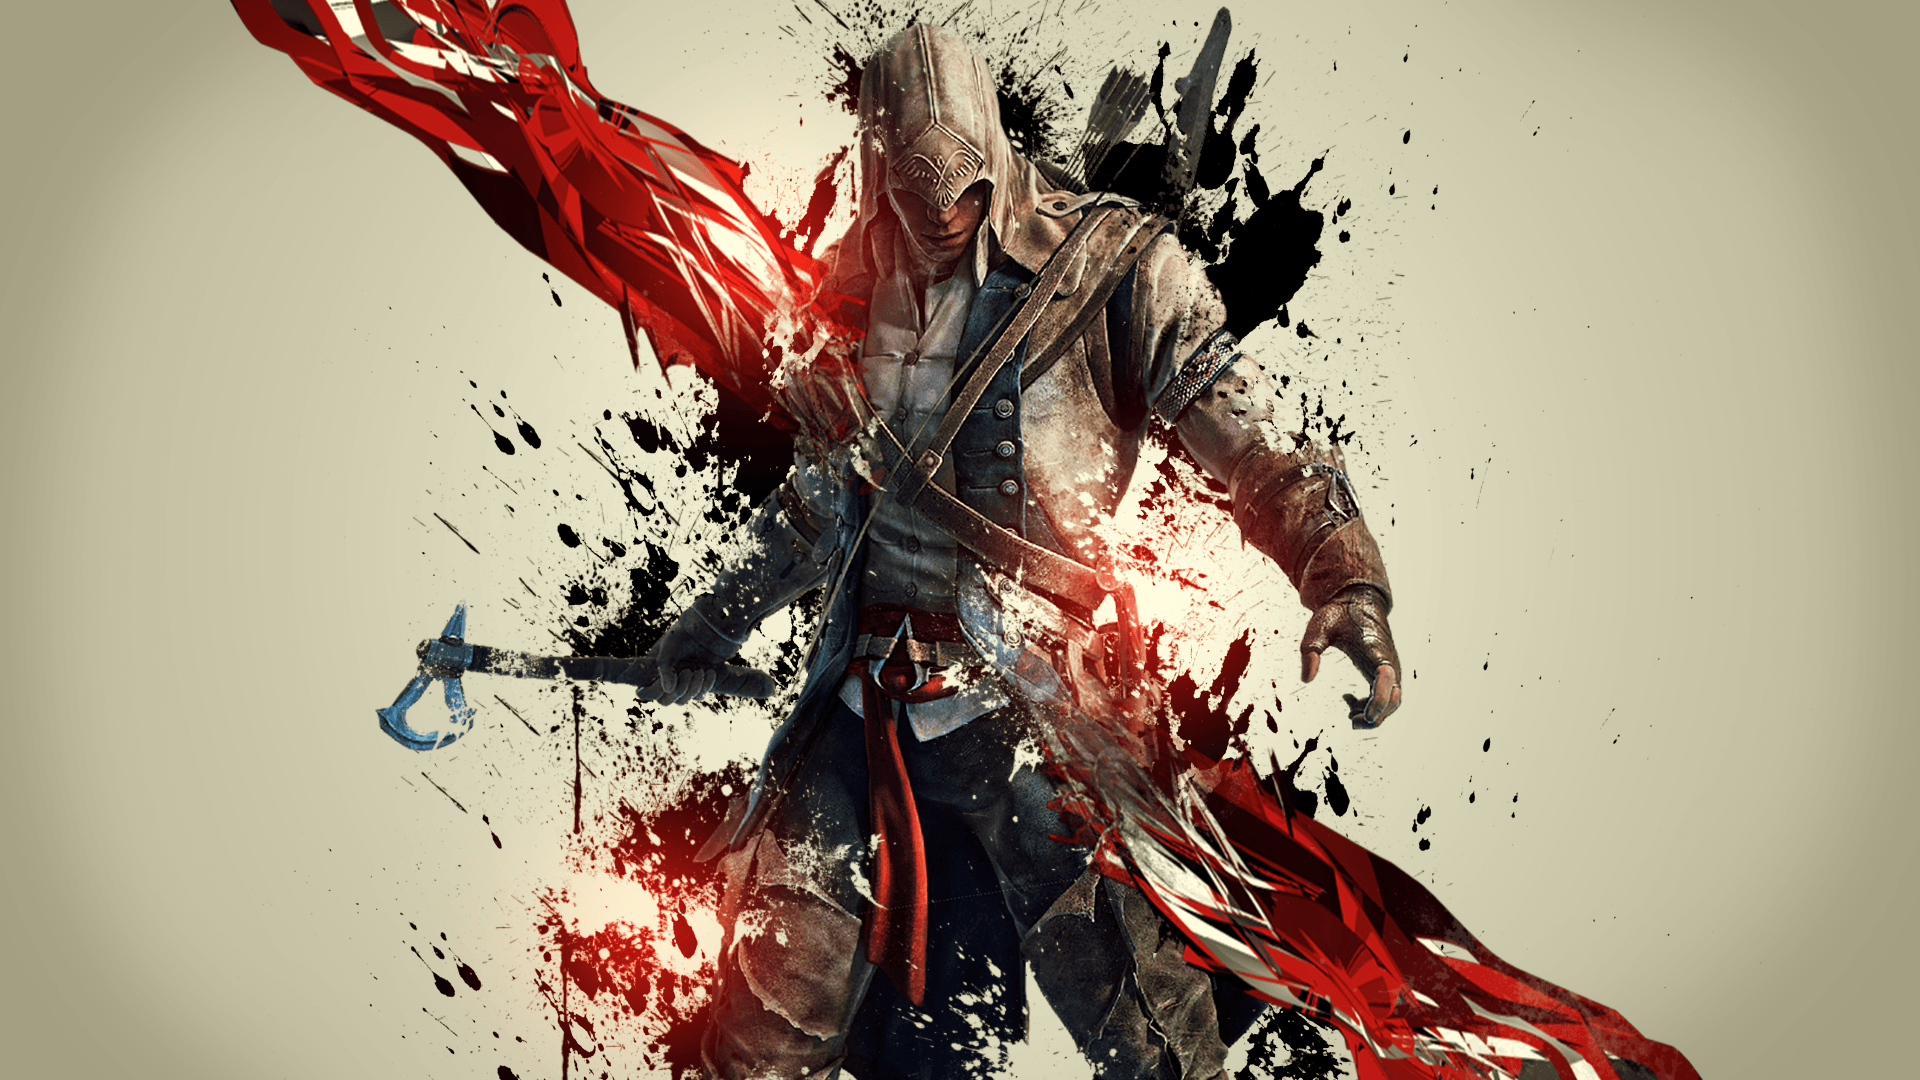 Connor (Assassin's Creed) HD Wallpaper. Background